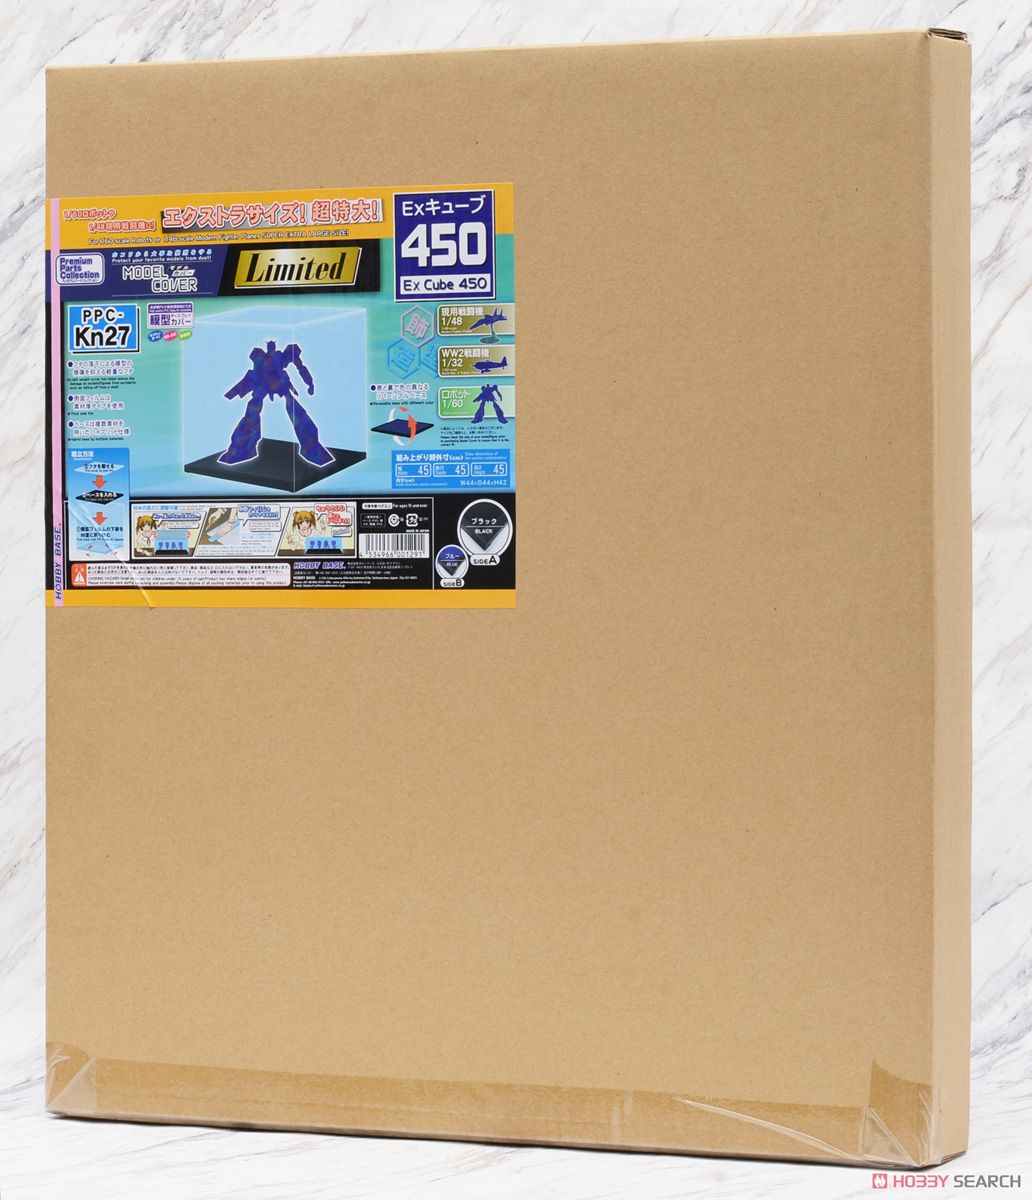 Model Cover Limited Ex Cube 450 (Display) Package1